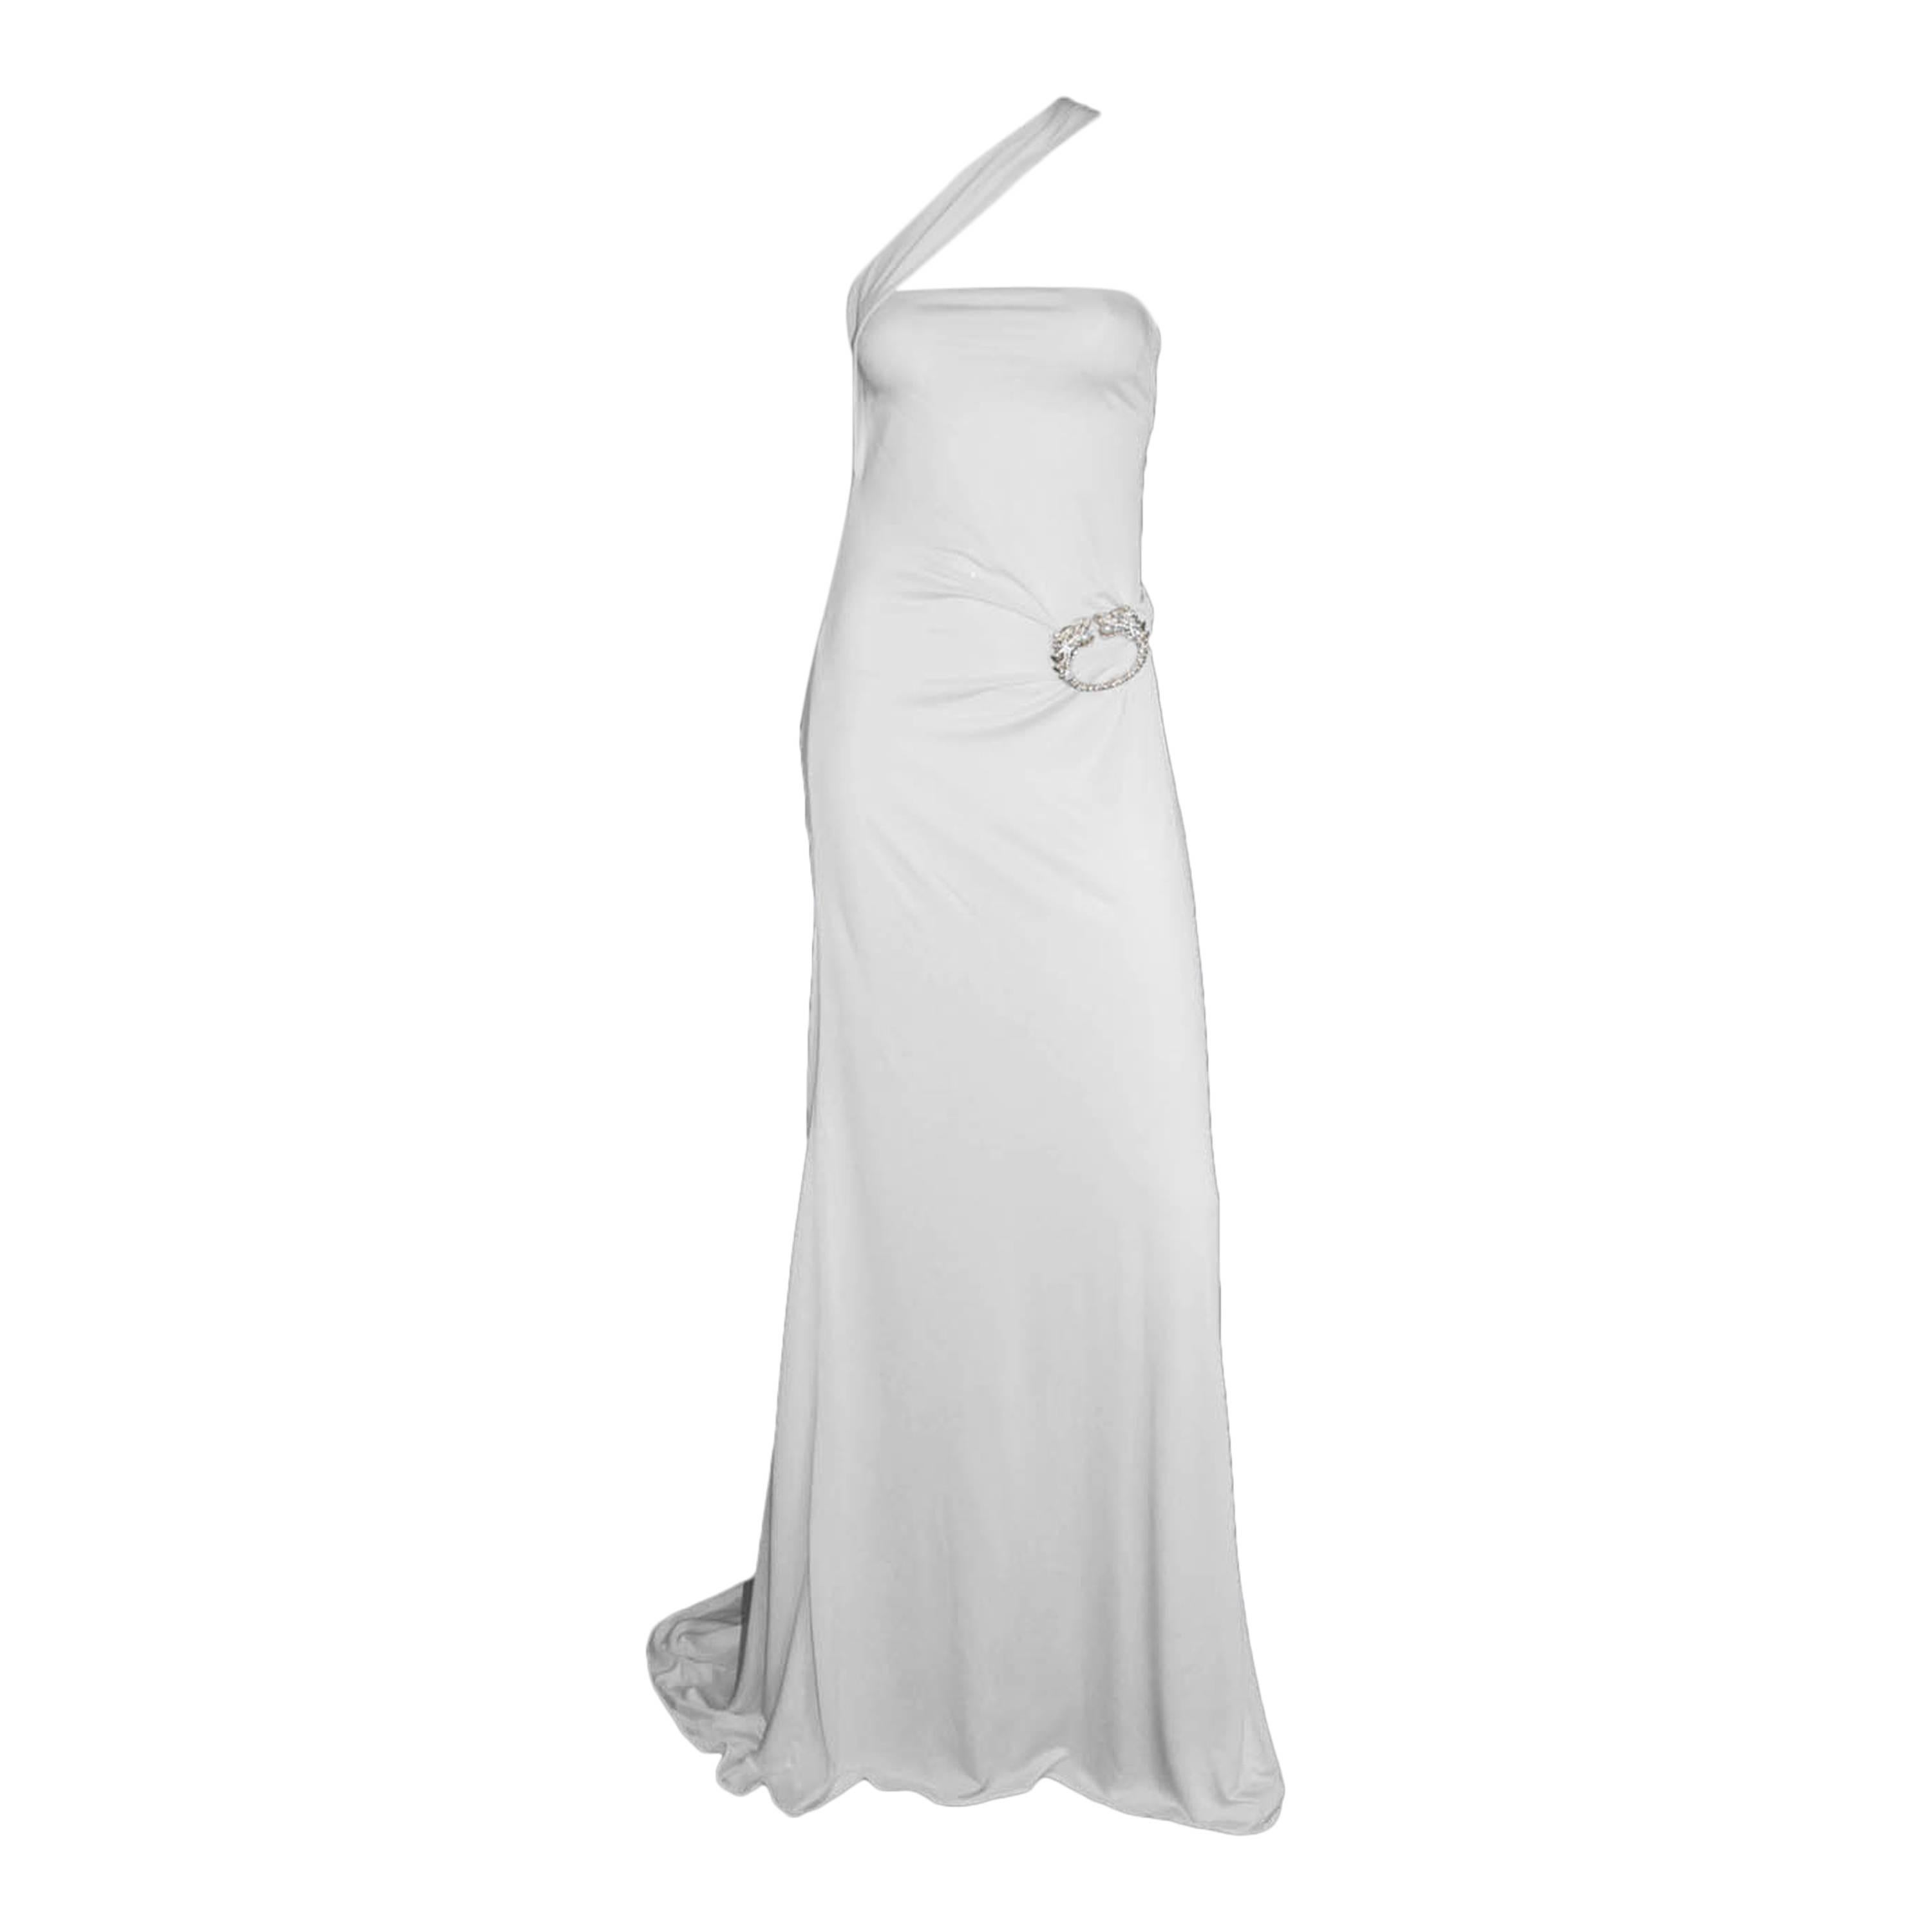 One Of Four Uber-Rare & Iconic Tom Ford Gucci FW04 Collection White Dragon Gowns For Sale